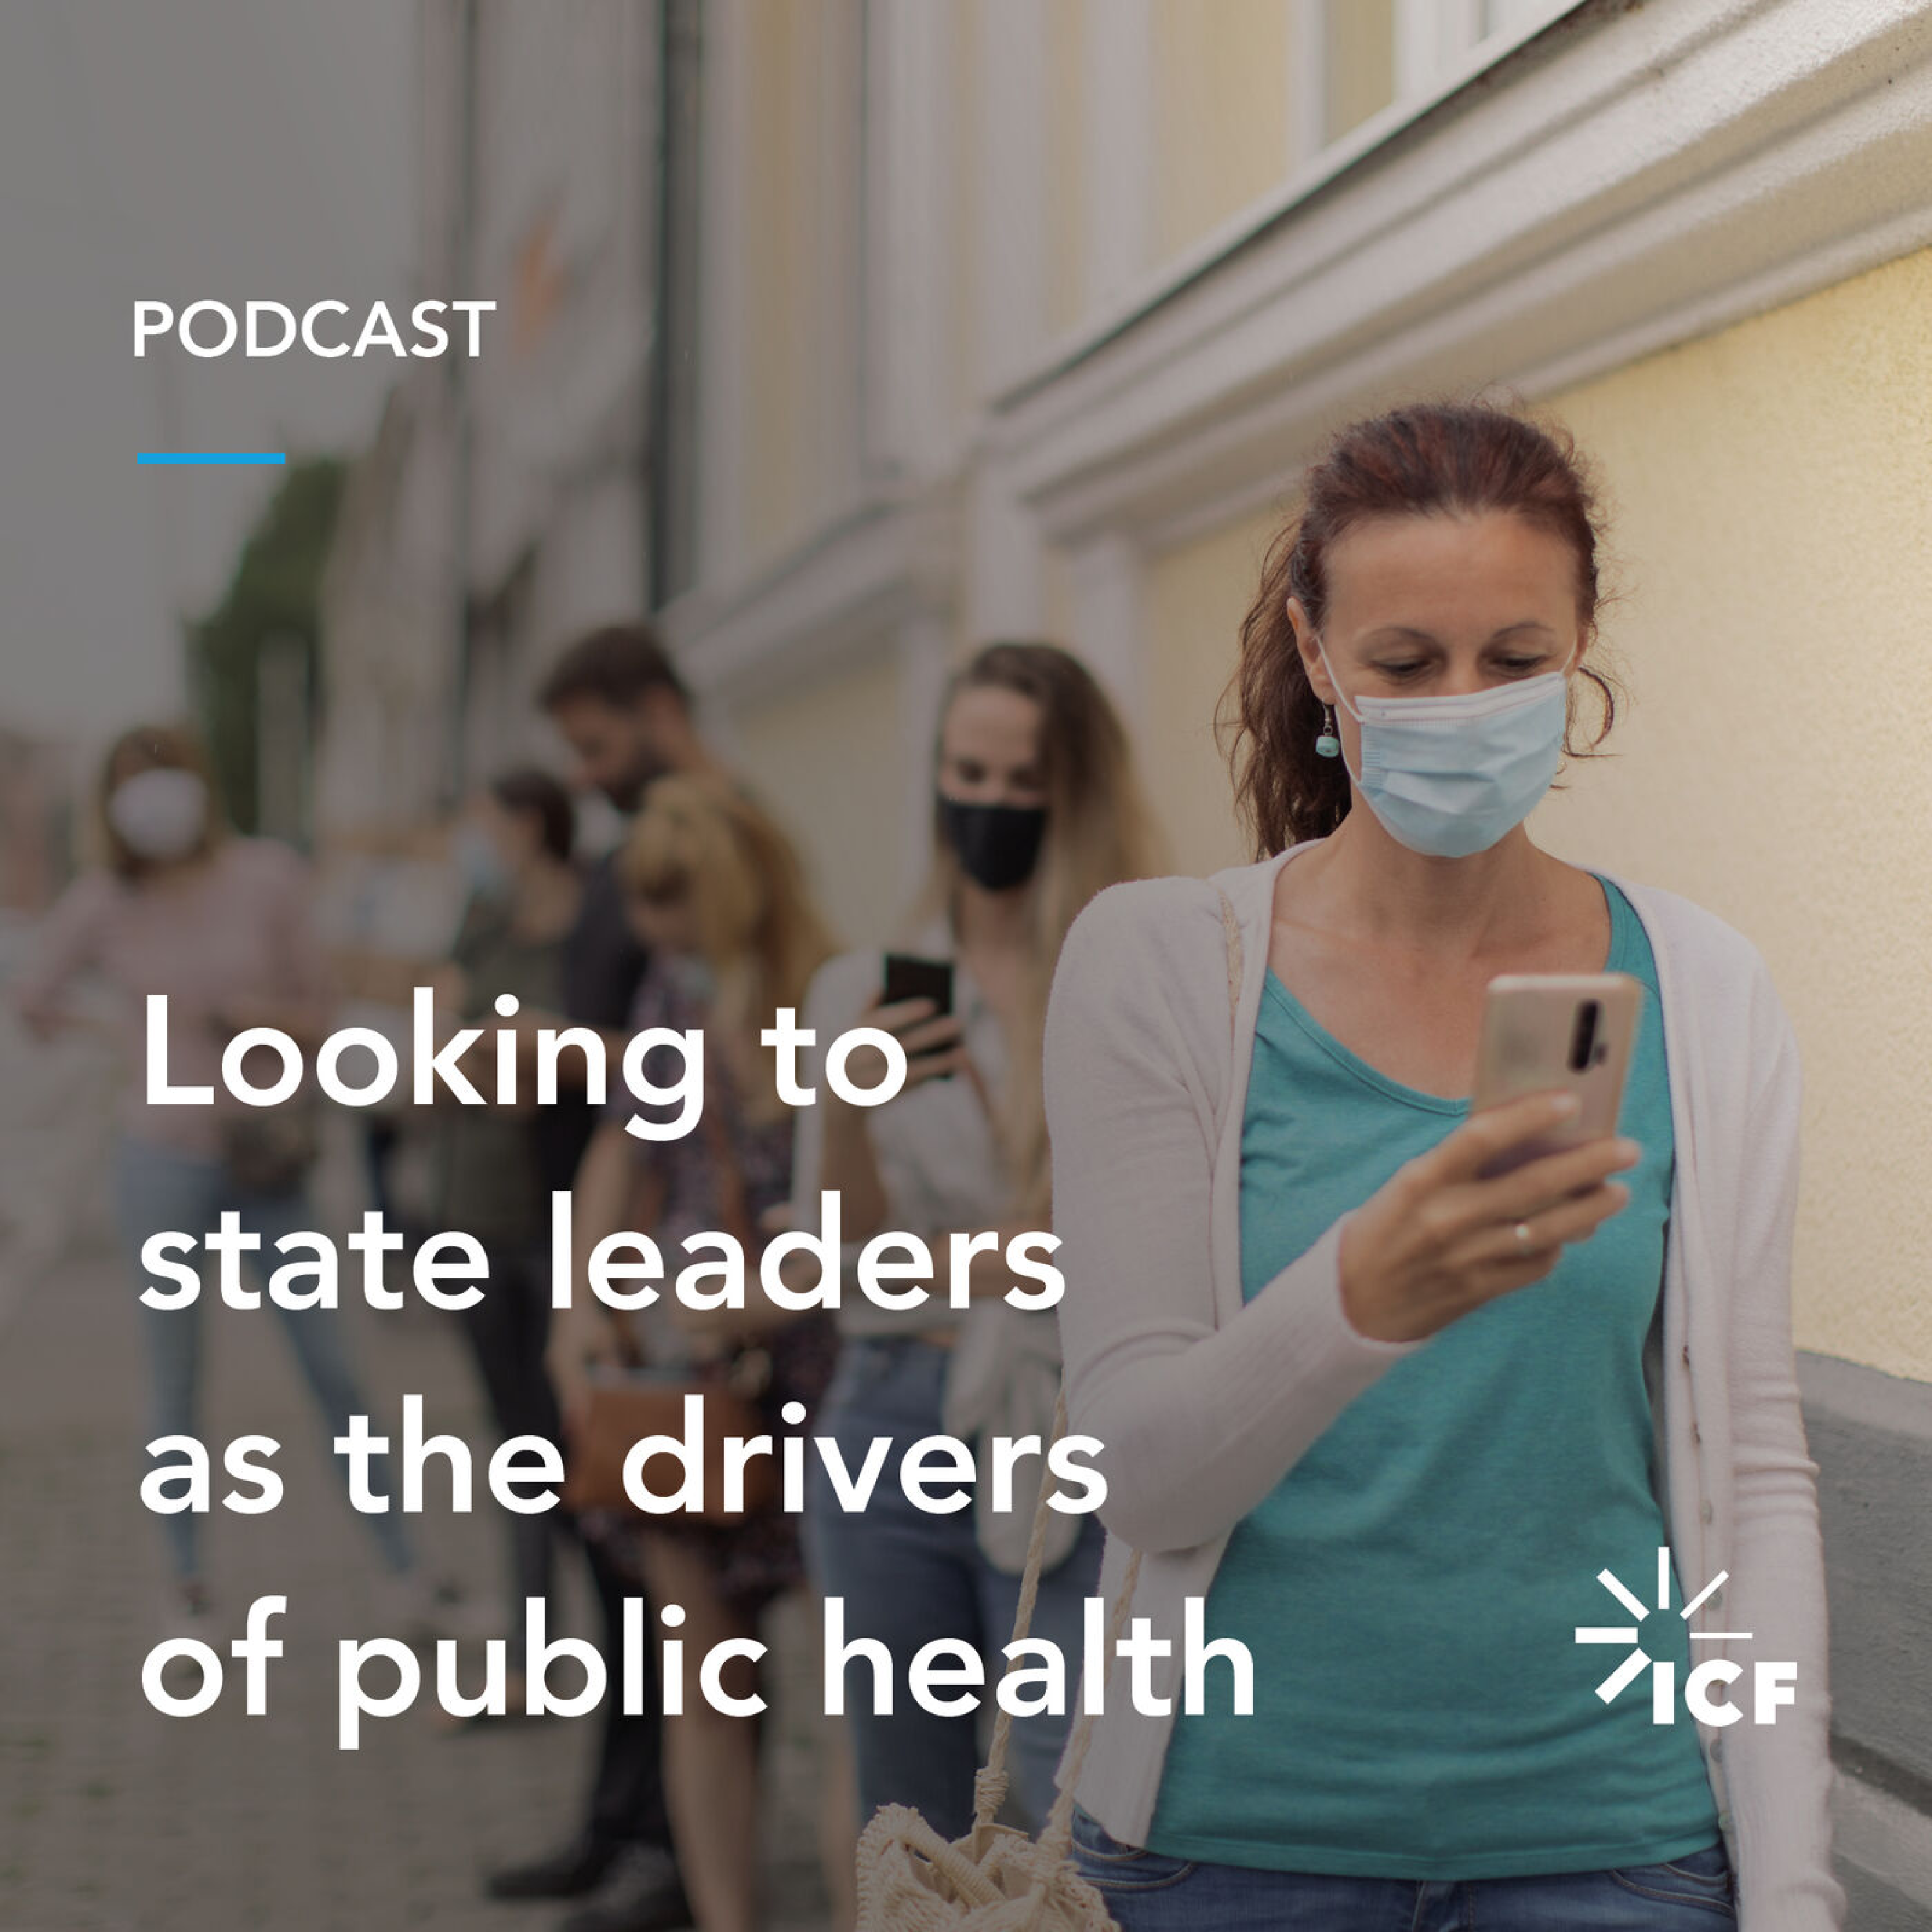 Looking to state leaders as the drivers of public health